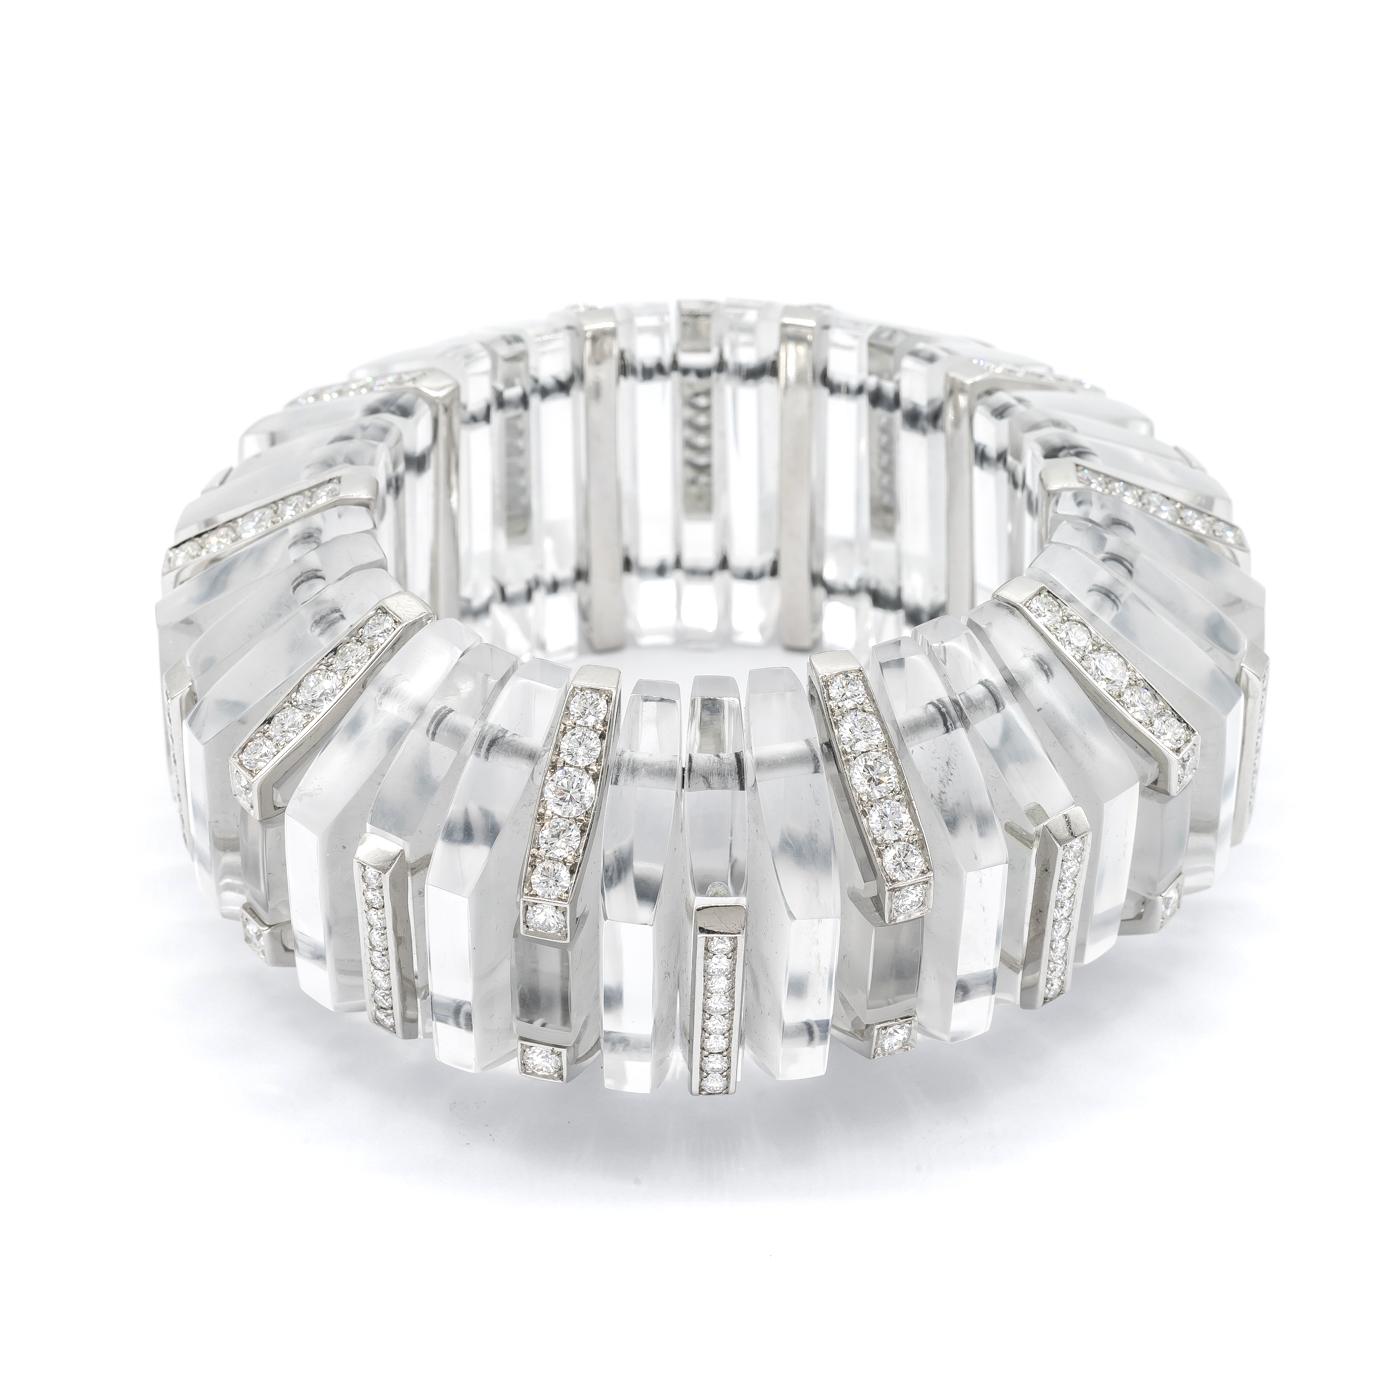 A rock crystal and diamond geometric expanding cuff bracelet, designed as a repeating pattern of half hexagon, rock crystal segments, alternating with overlaid diamond links, one with the diamonds on the front facet, the other with the diamonds on